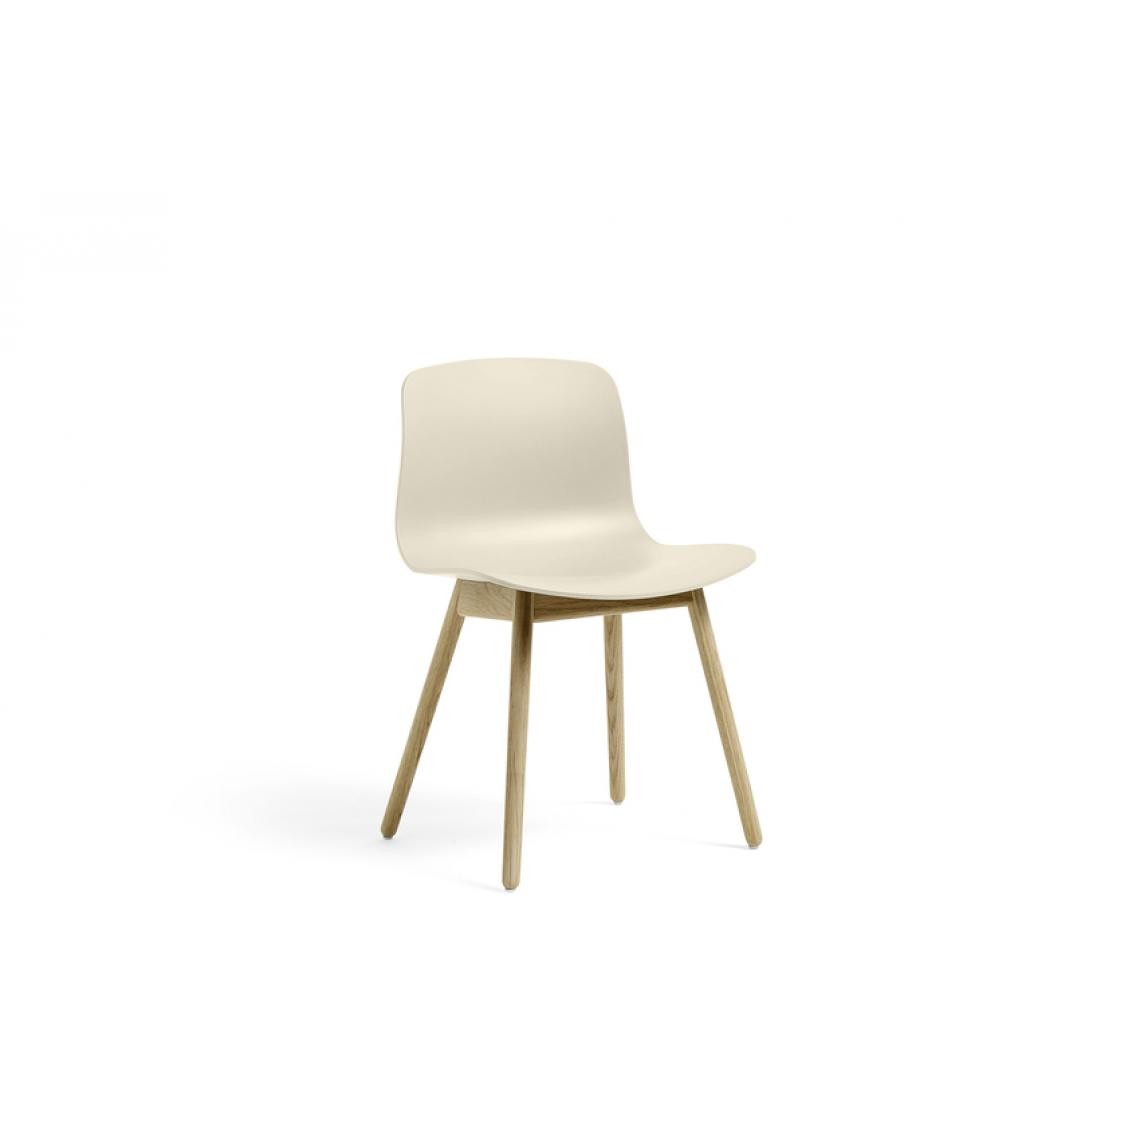 Hay - About A Chair AAC 12 ECO - blanc crème - Chaises